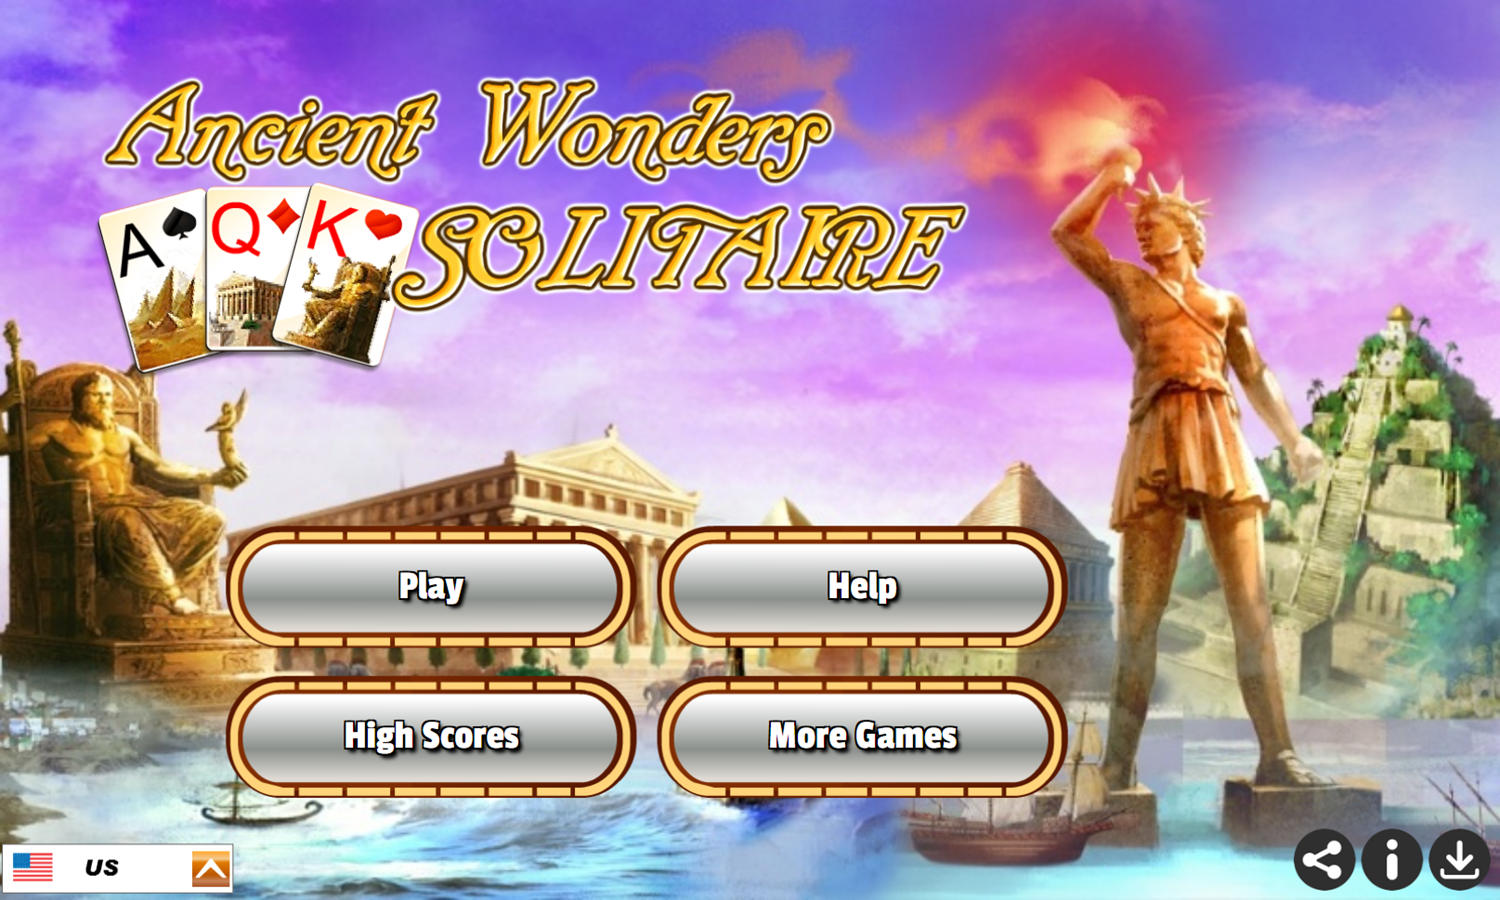 Ancient Wonders Solitaire Game Welcome Screen Screenshot.